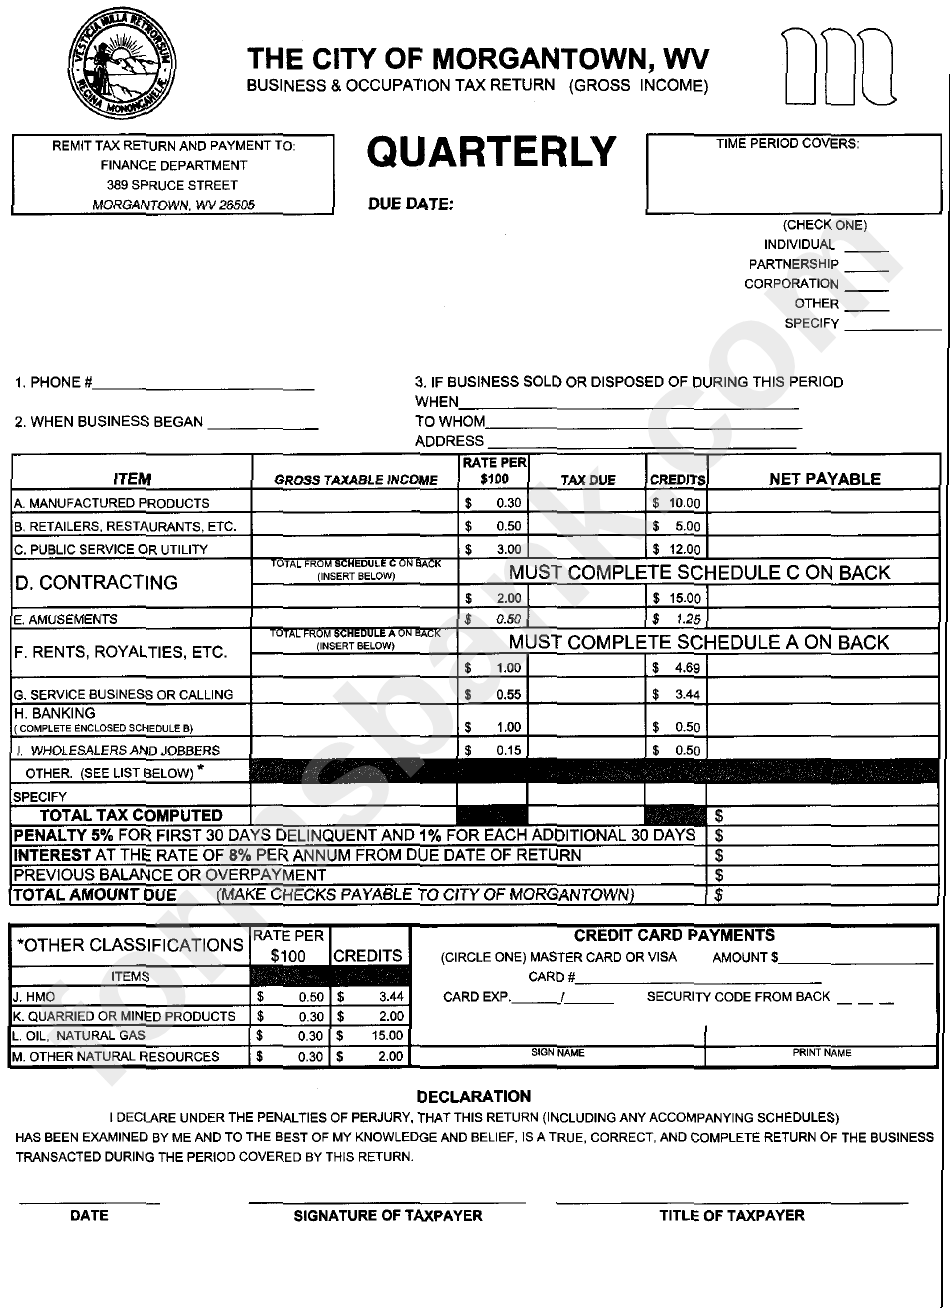 Business & Occupation Tax Return(Gross Income) - City Of Morgantown, West Virginia